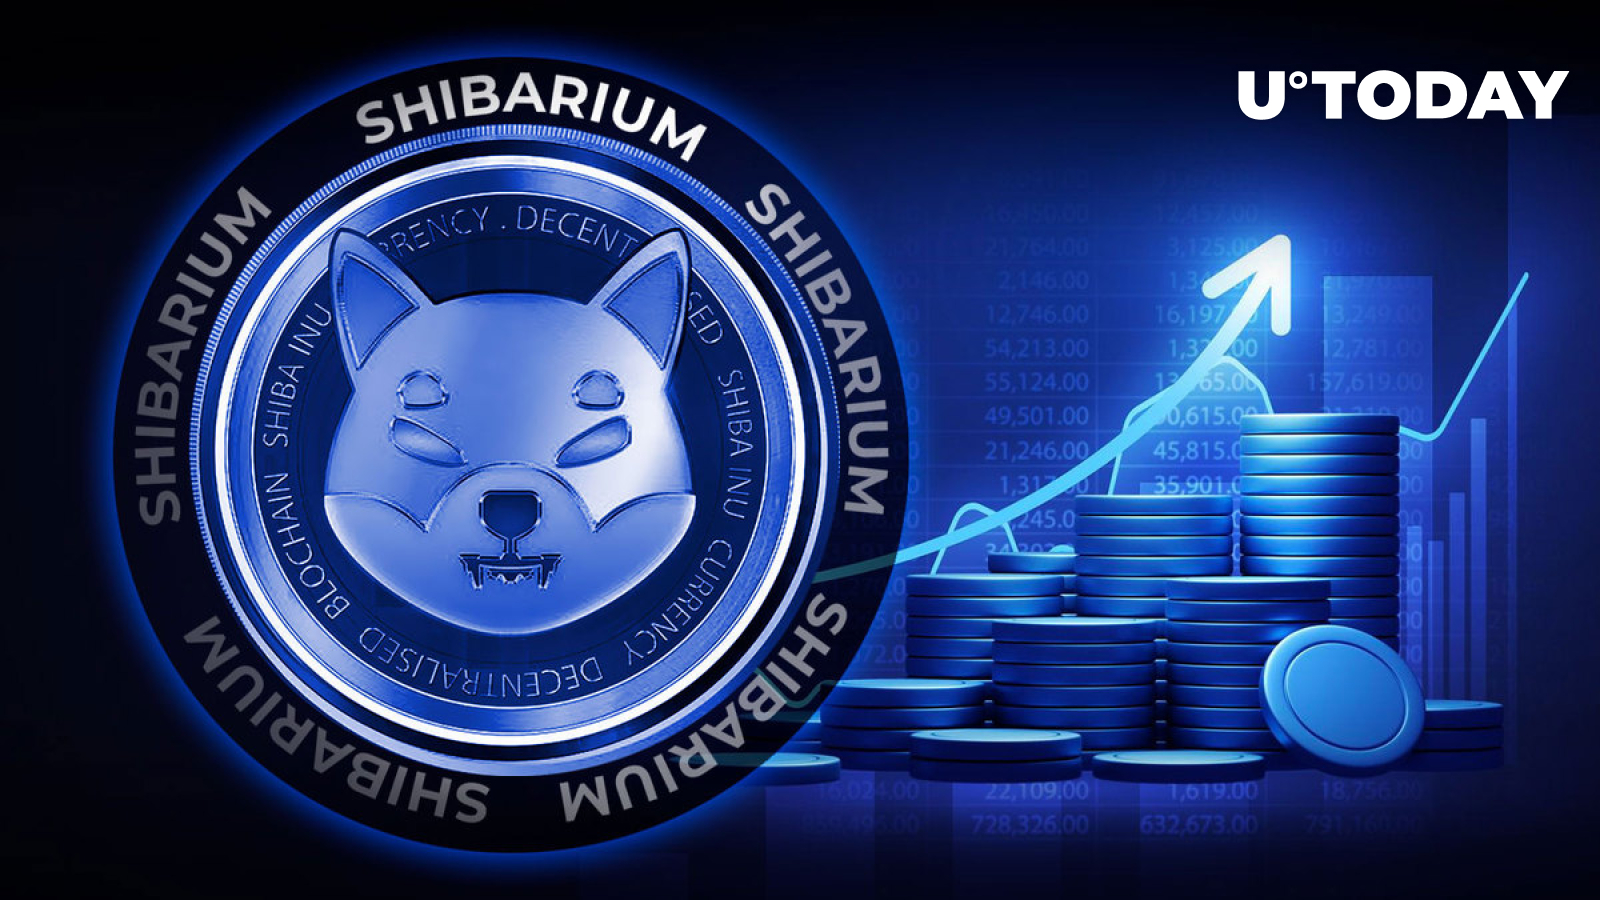 Shibarium’s Transactions Soar as Major Exchange Hints at Support